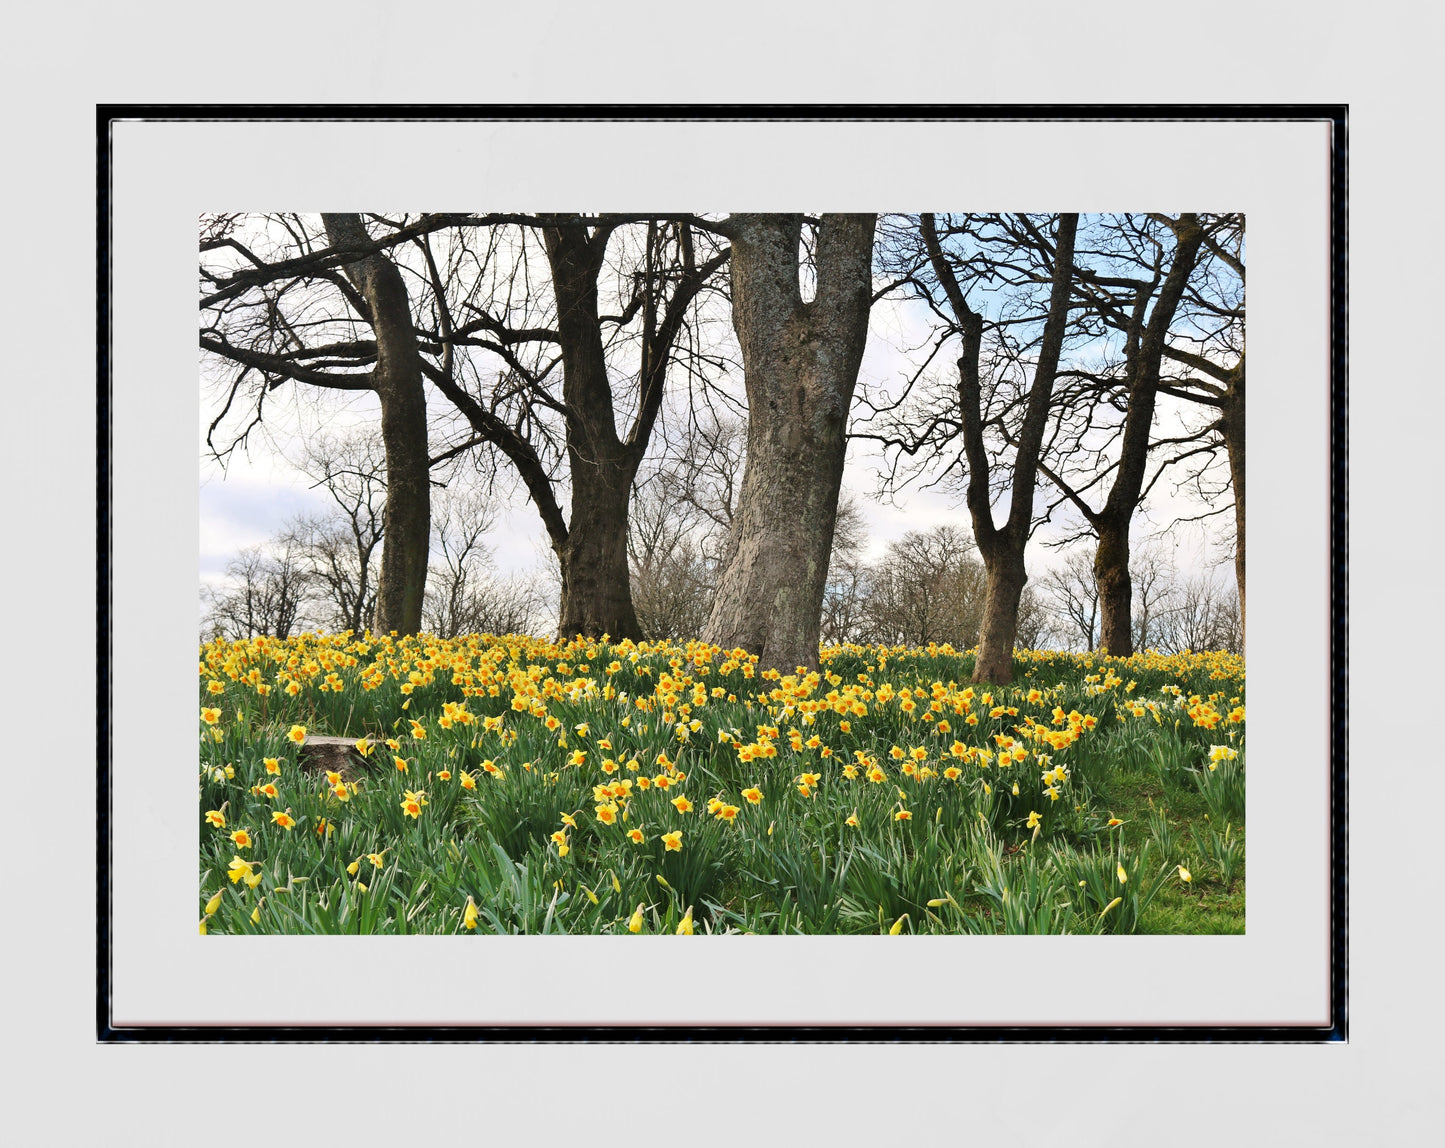 Glasgow Queen's Park Spring Daffodils Photography Print